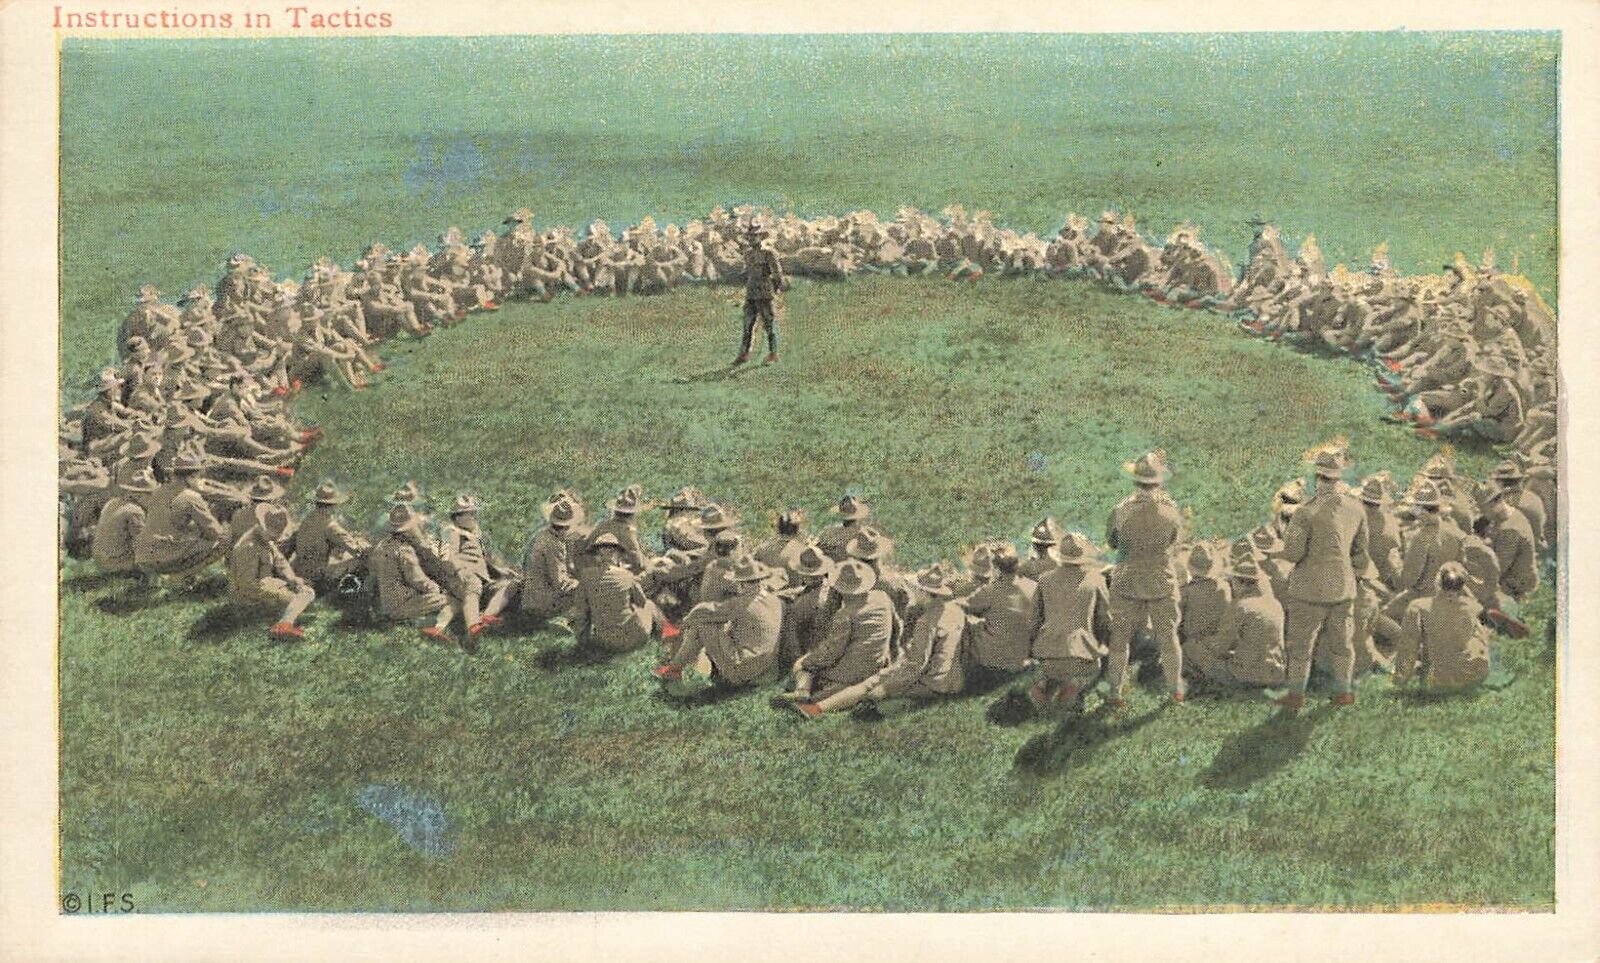 Army Military Postcard Instructions In Tactics